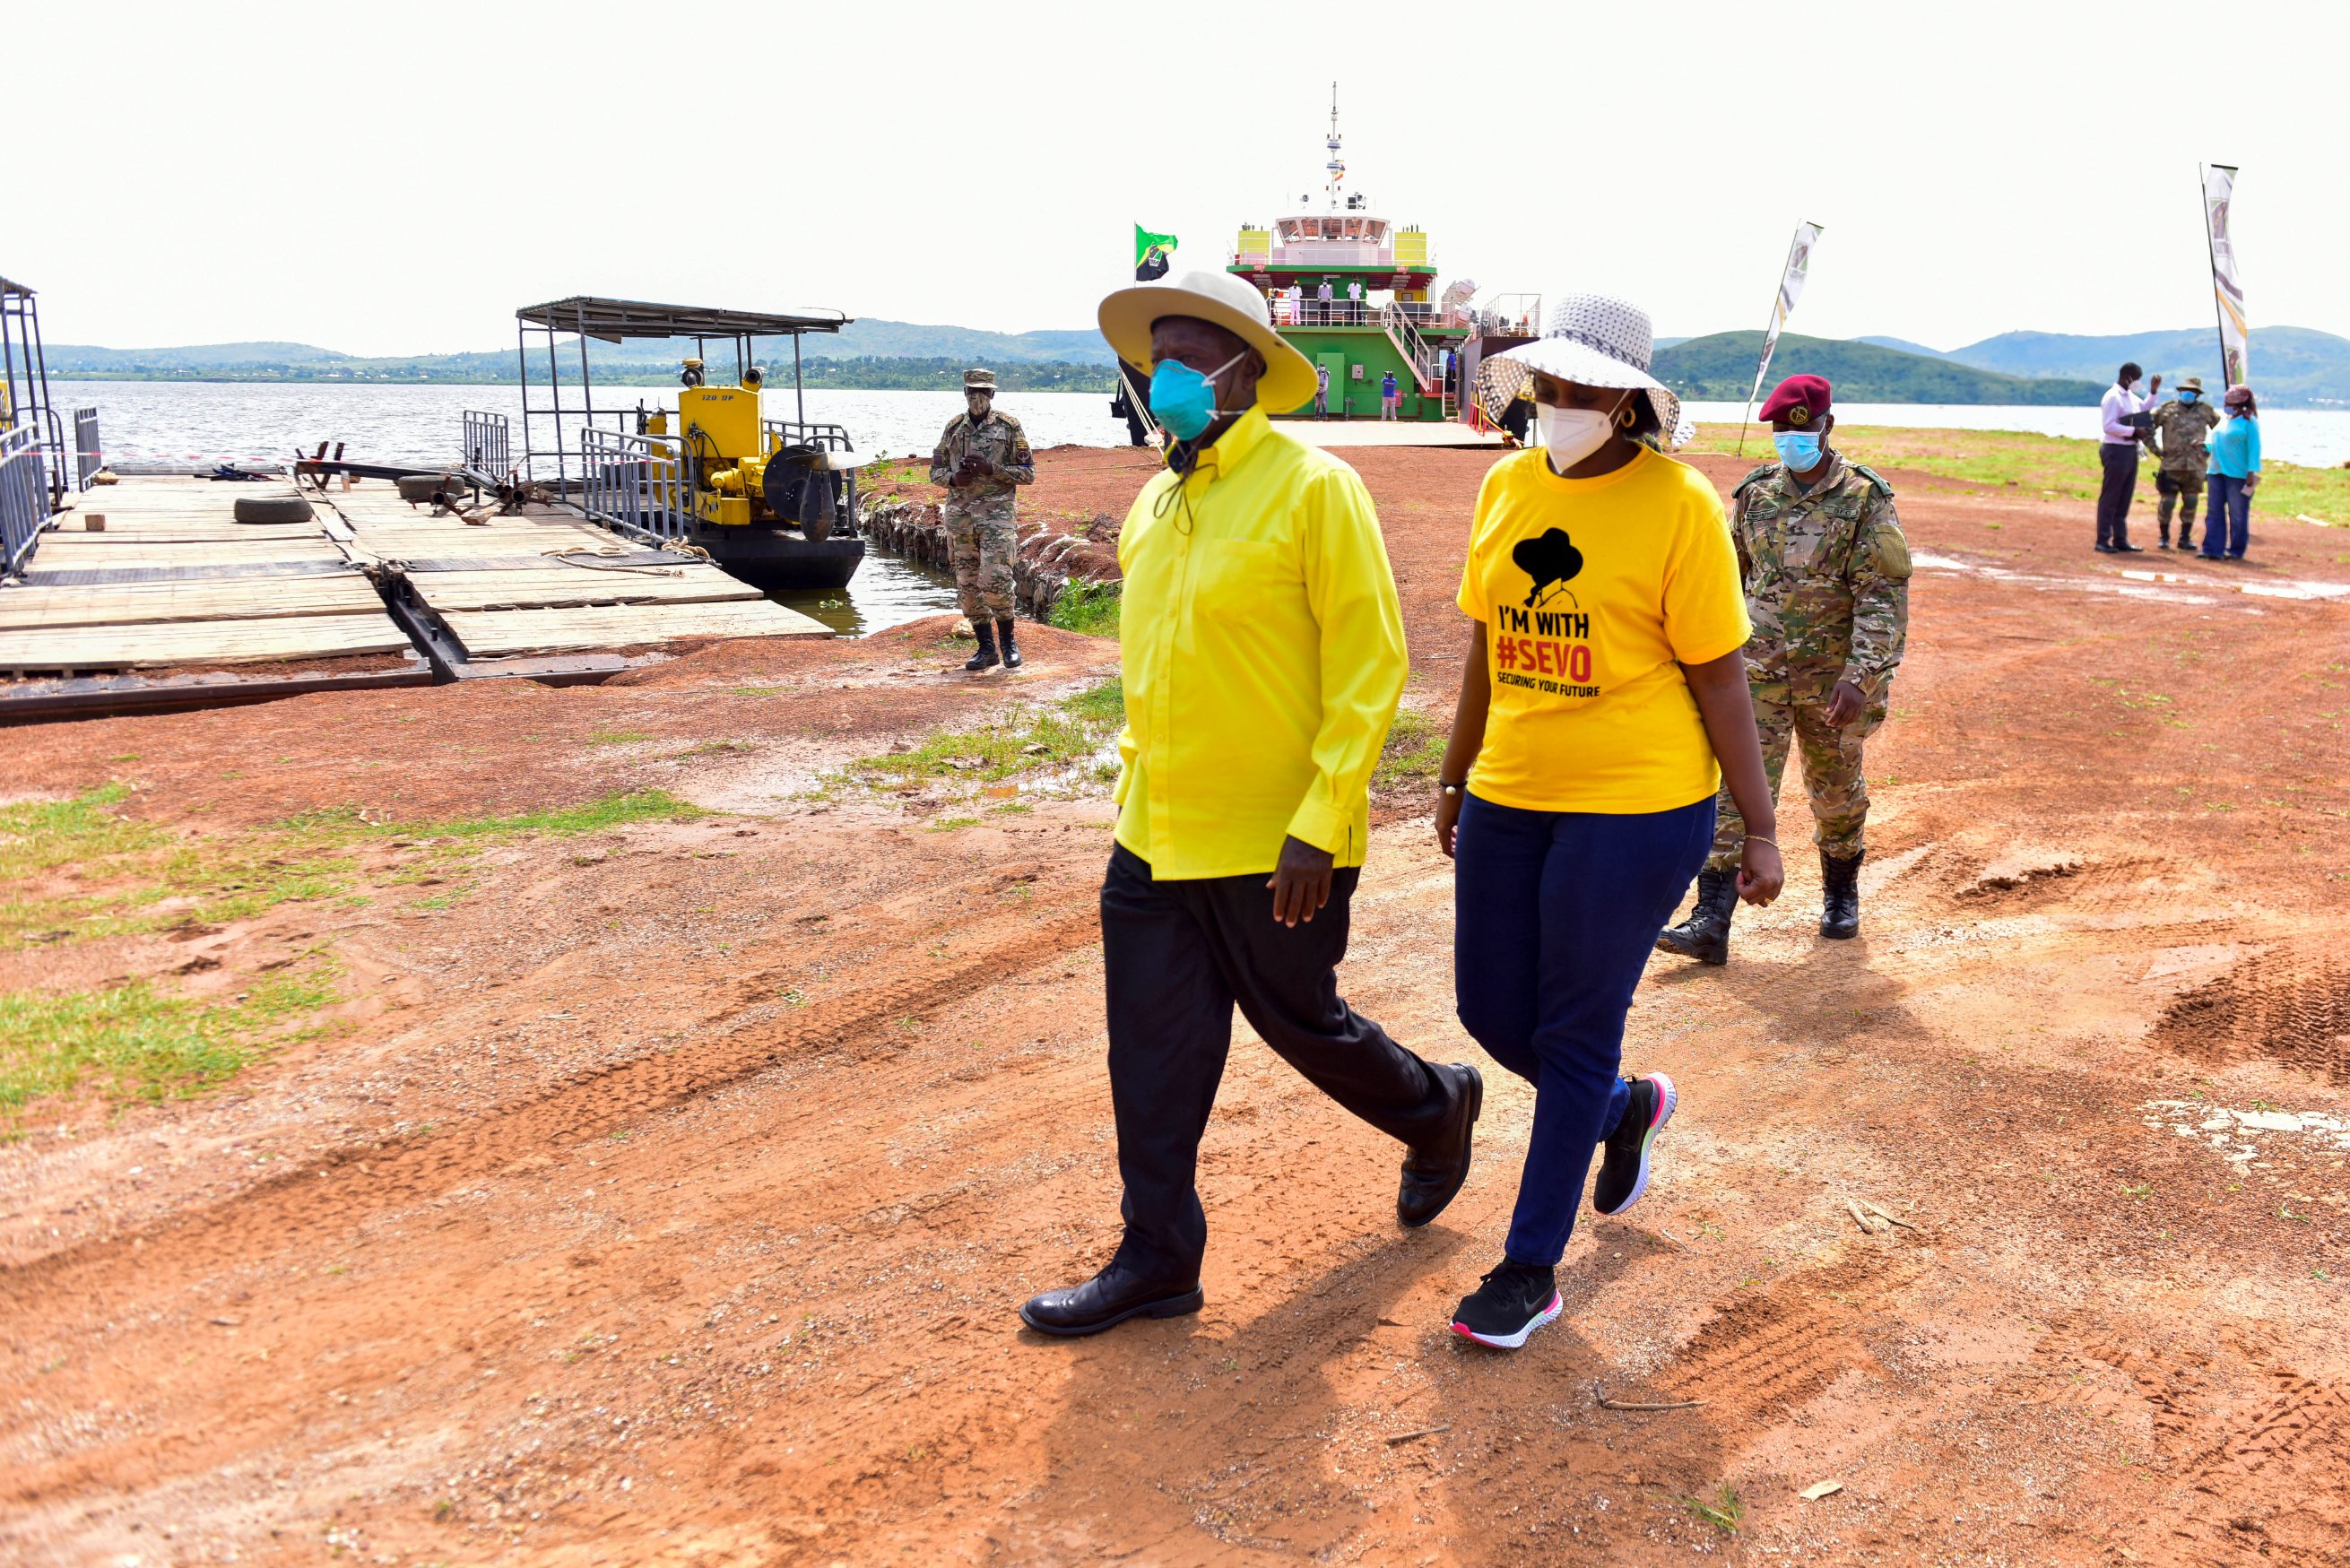 President Museveni and daughter Natasha after the launch of the ferry